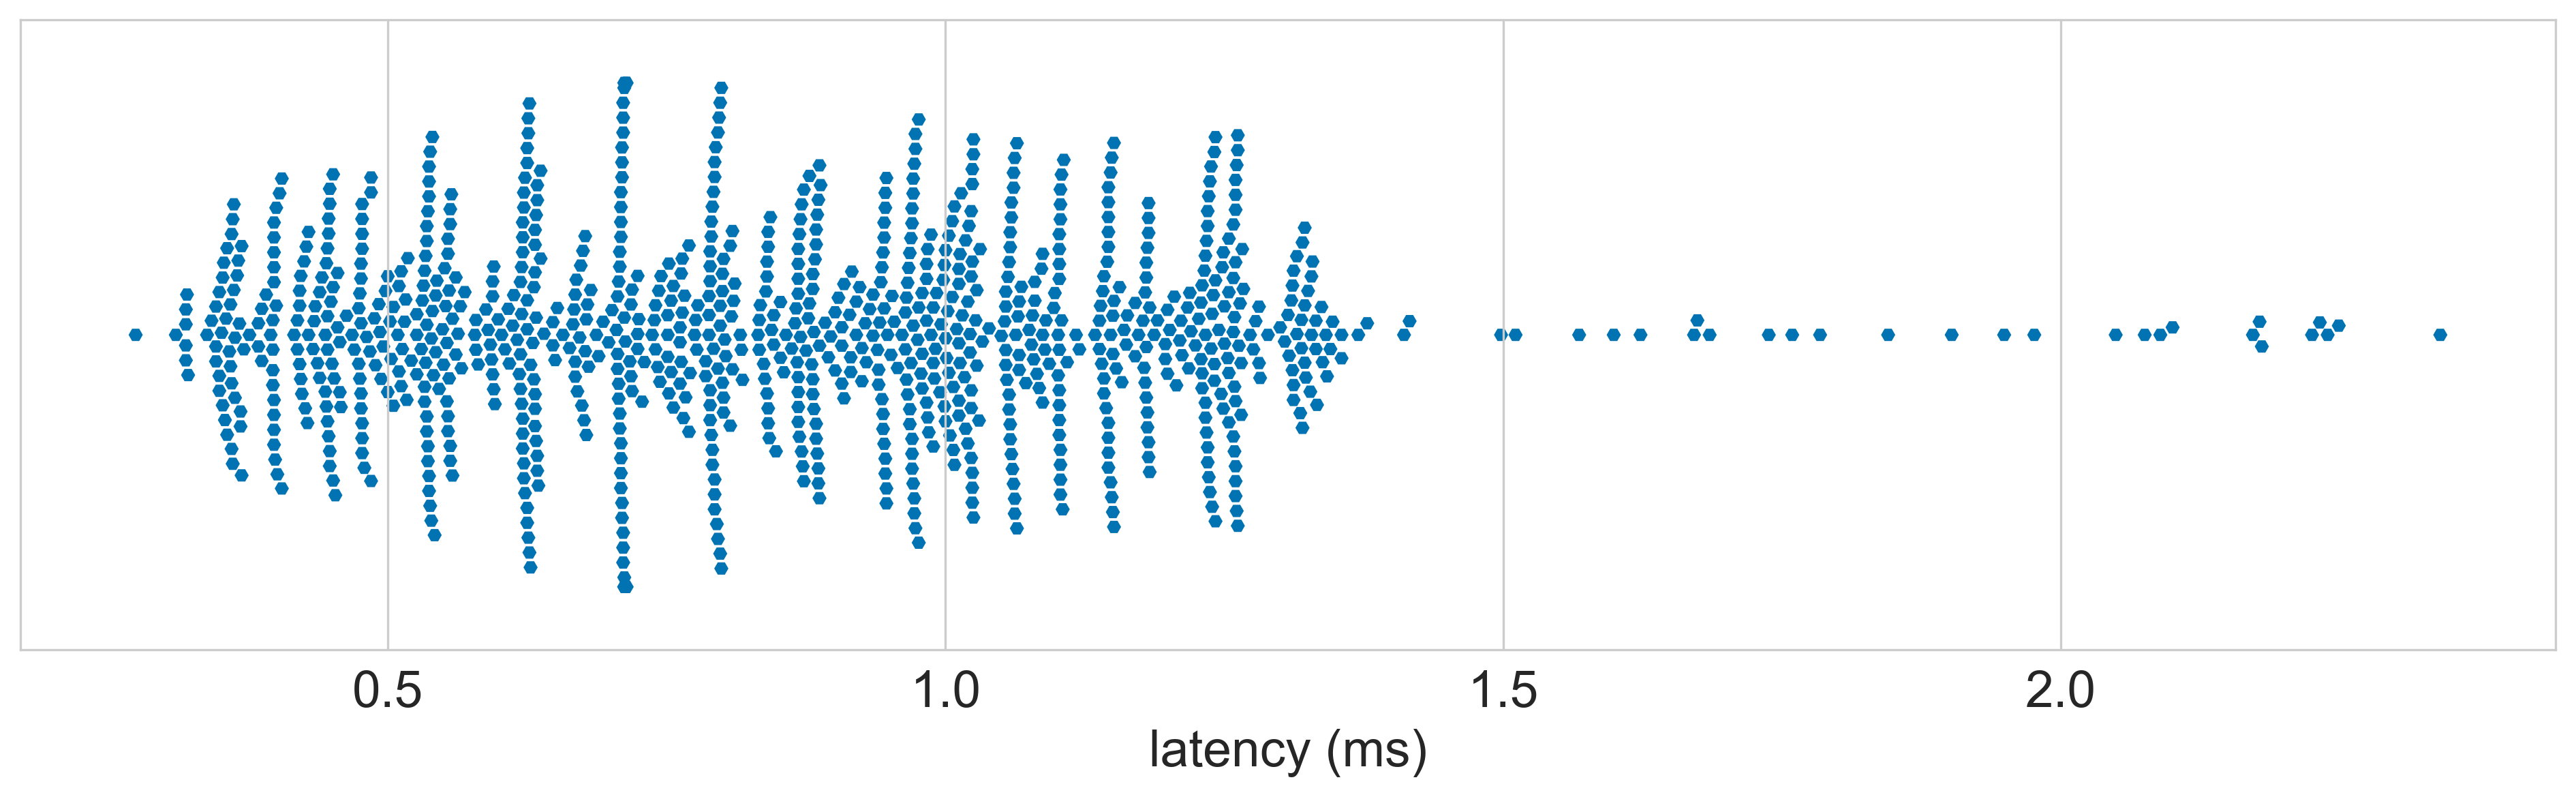 Brook_P4_Wired_Gamepad_V2_8 latency distribution 